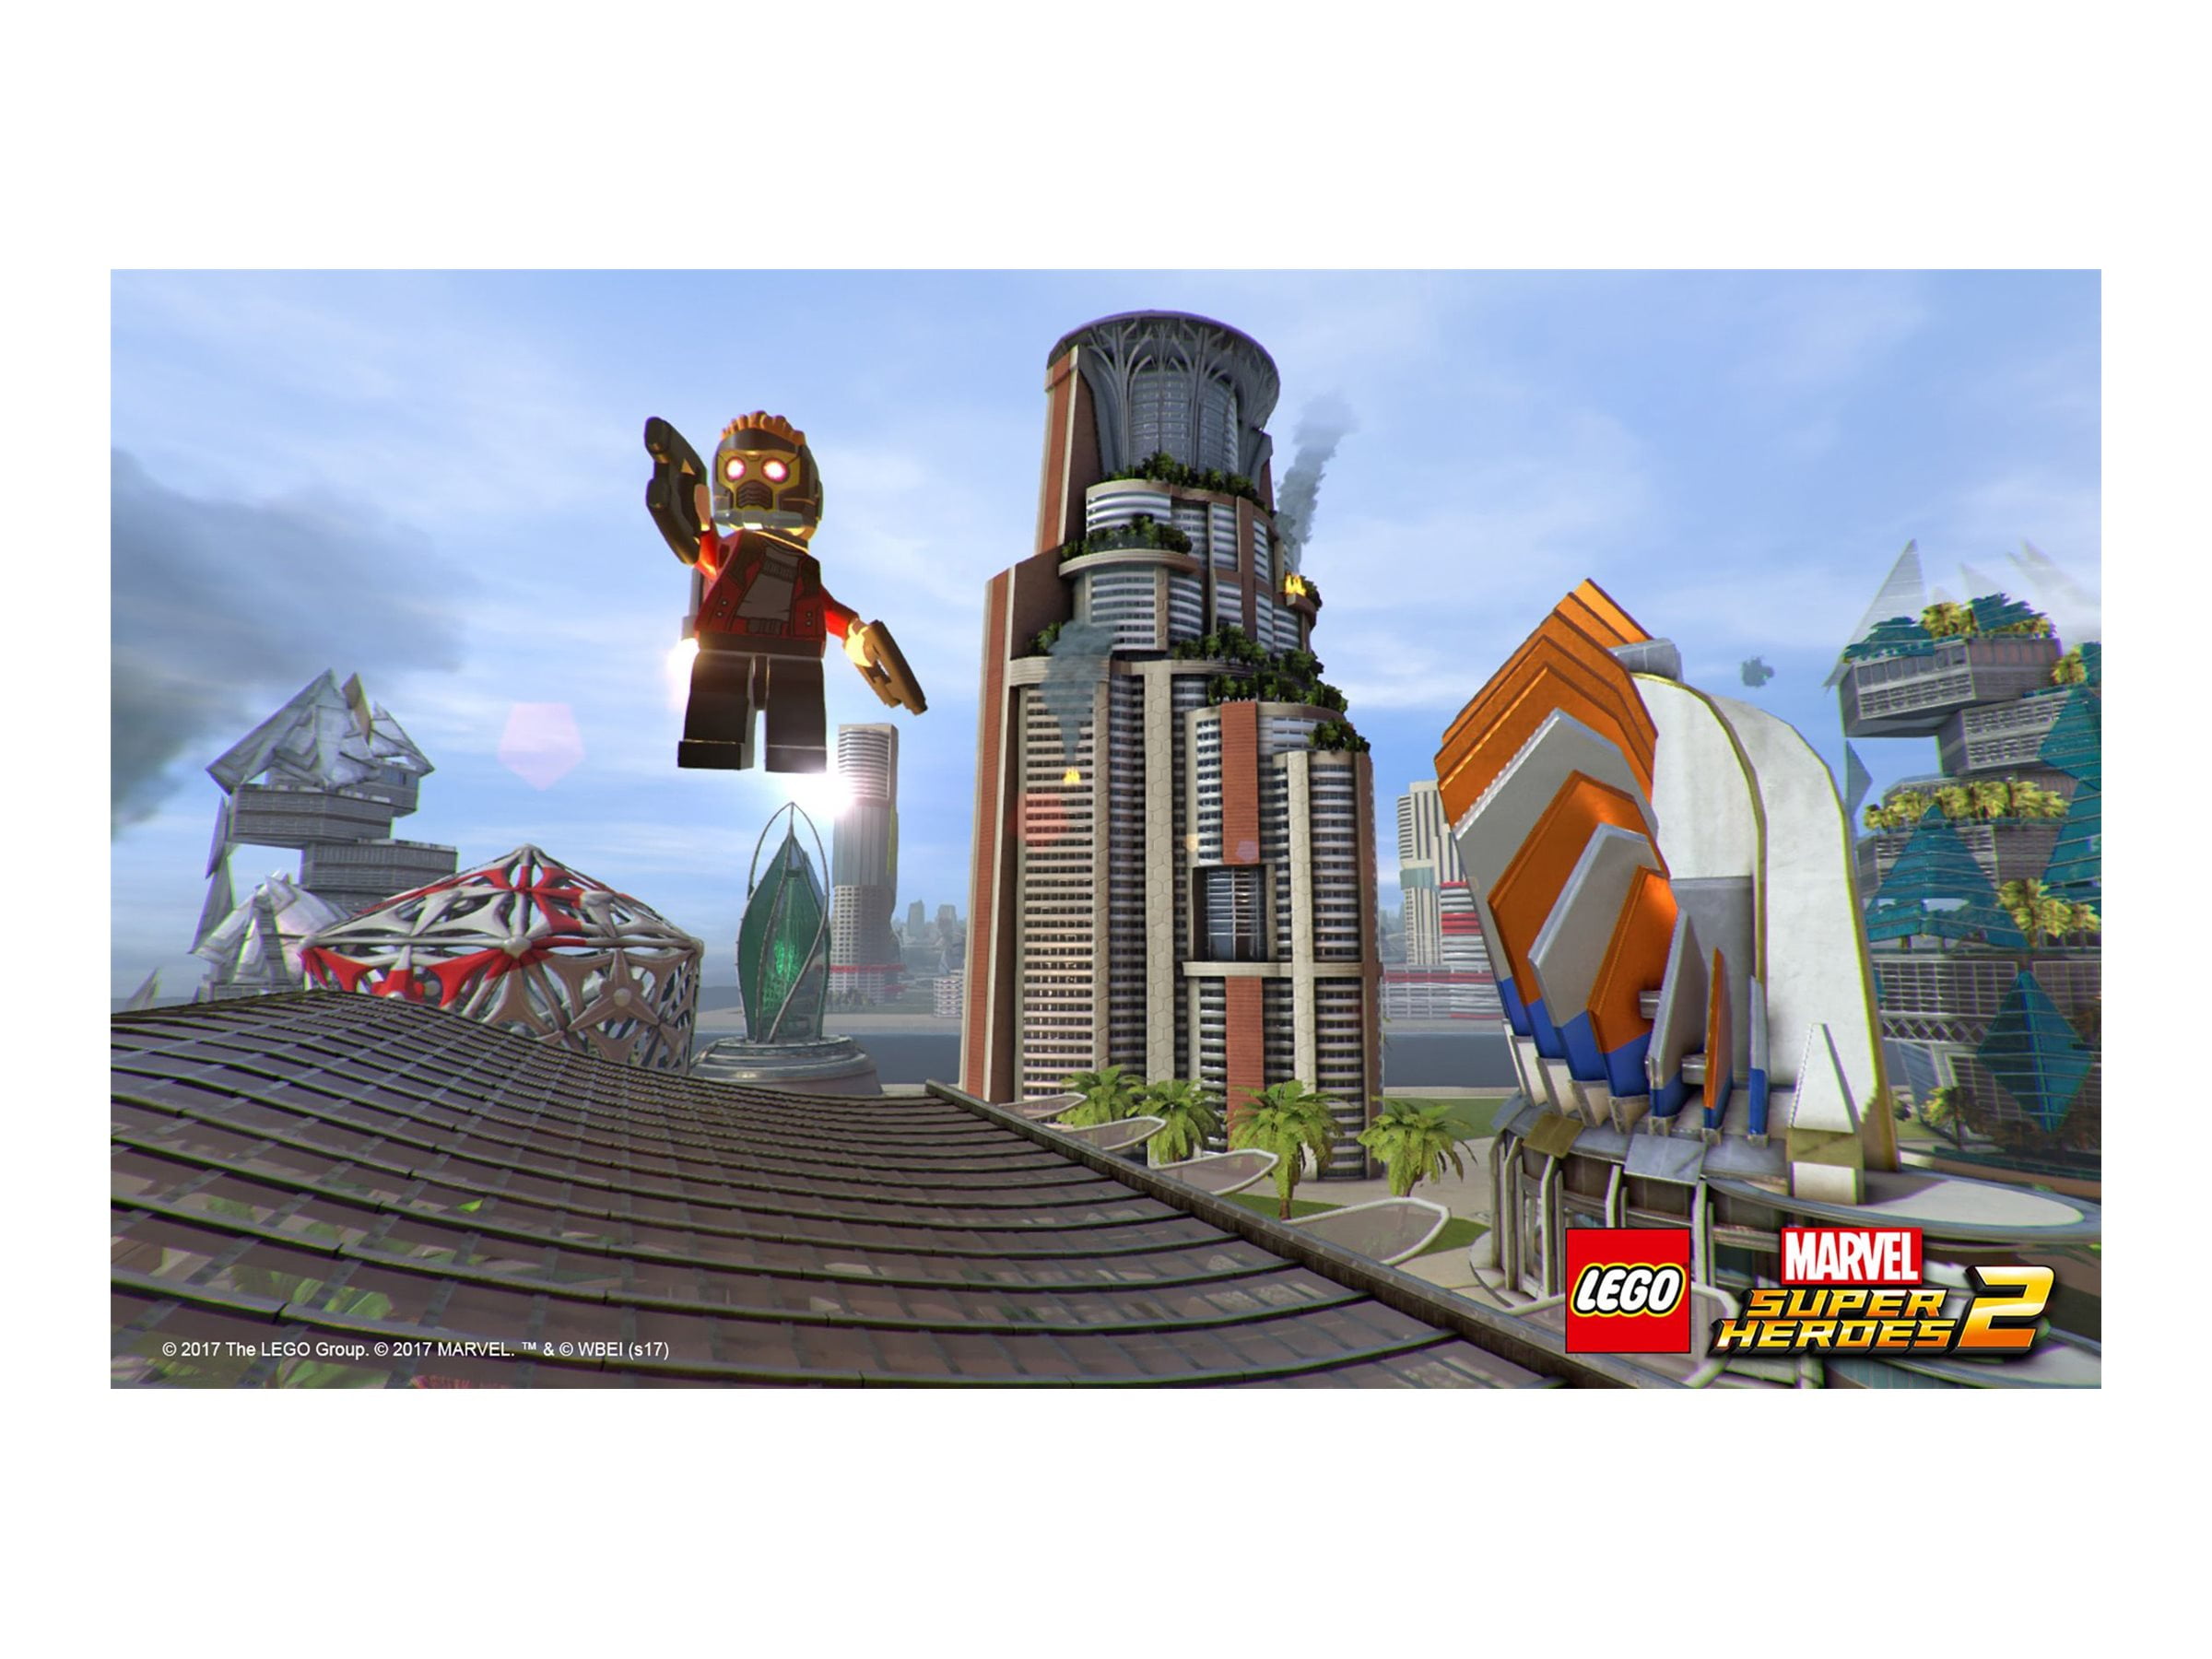 LEGO Marvel Collection [ 3 Games in 1 Pack ] (XBOX ONE) NEW